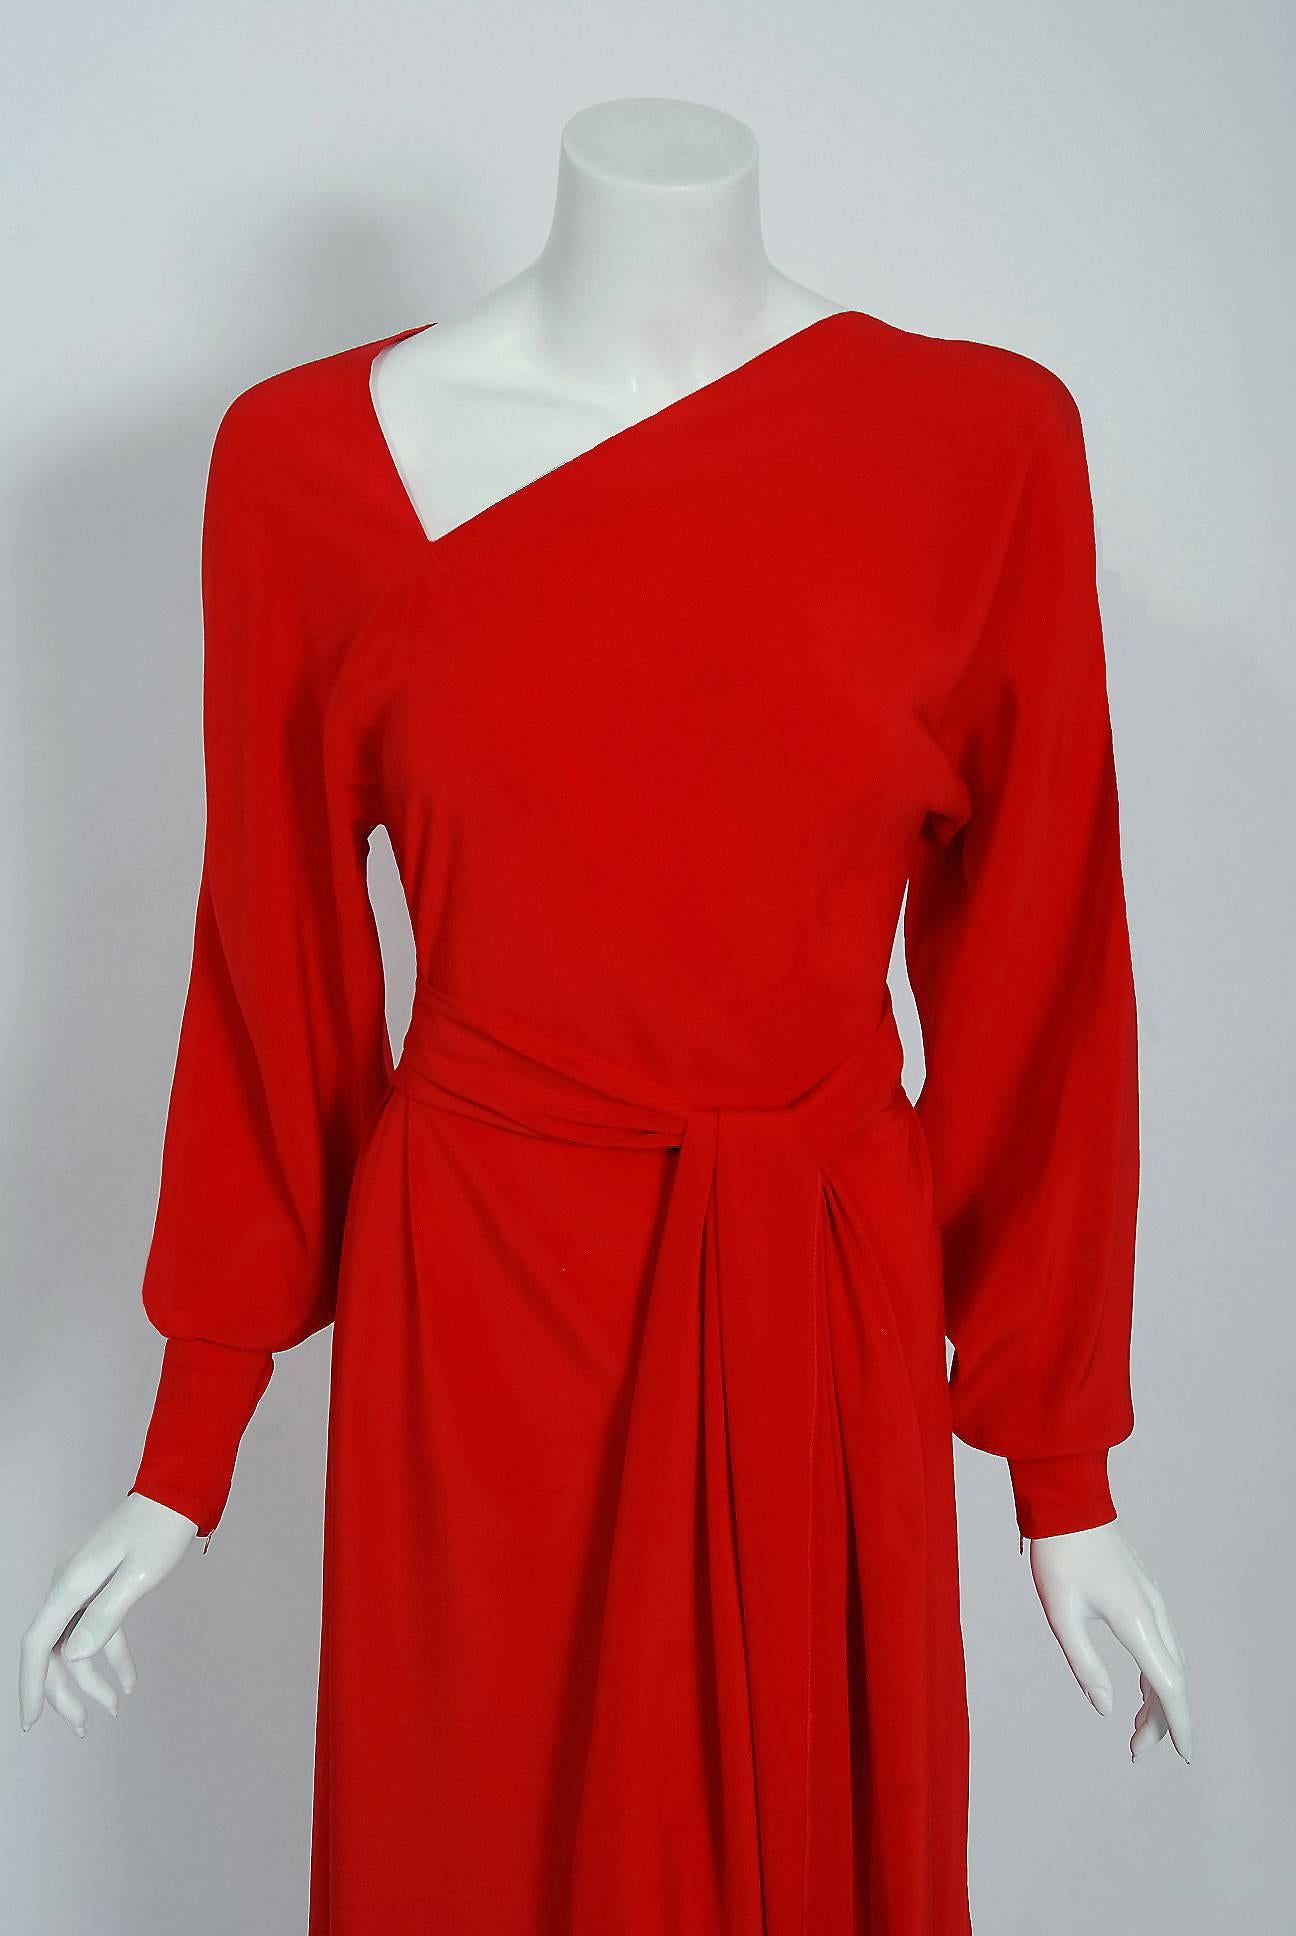 Gorgeous Halston Couture belted dress dating back to his 1977 collection. Throughout most of the seventies he epitomized the glamour, as well as the decadence of the era, becoming a central figure in the nightlife scene of New York's Studio 54. He